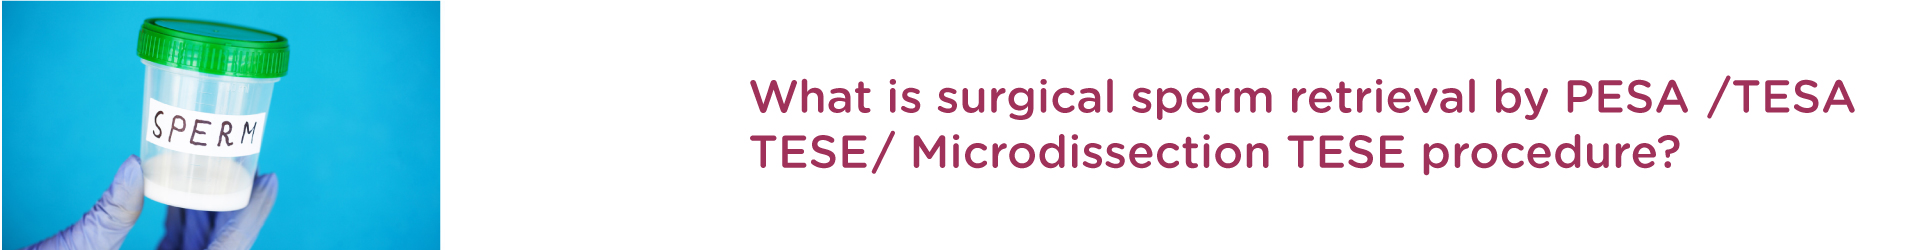 What is Surgical Sperm Retrieval By PESA/TESA/TESE/Microdissection TESE procedure?